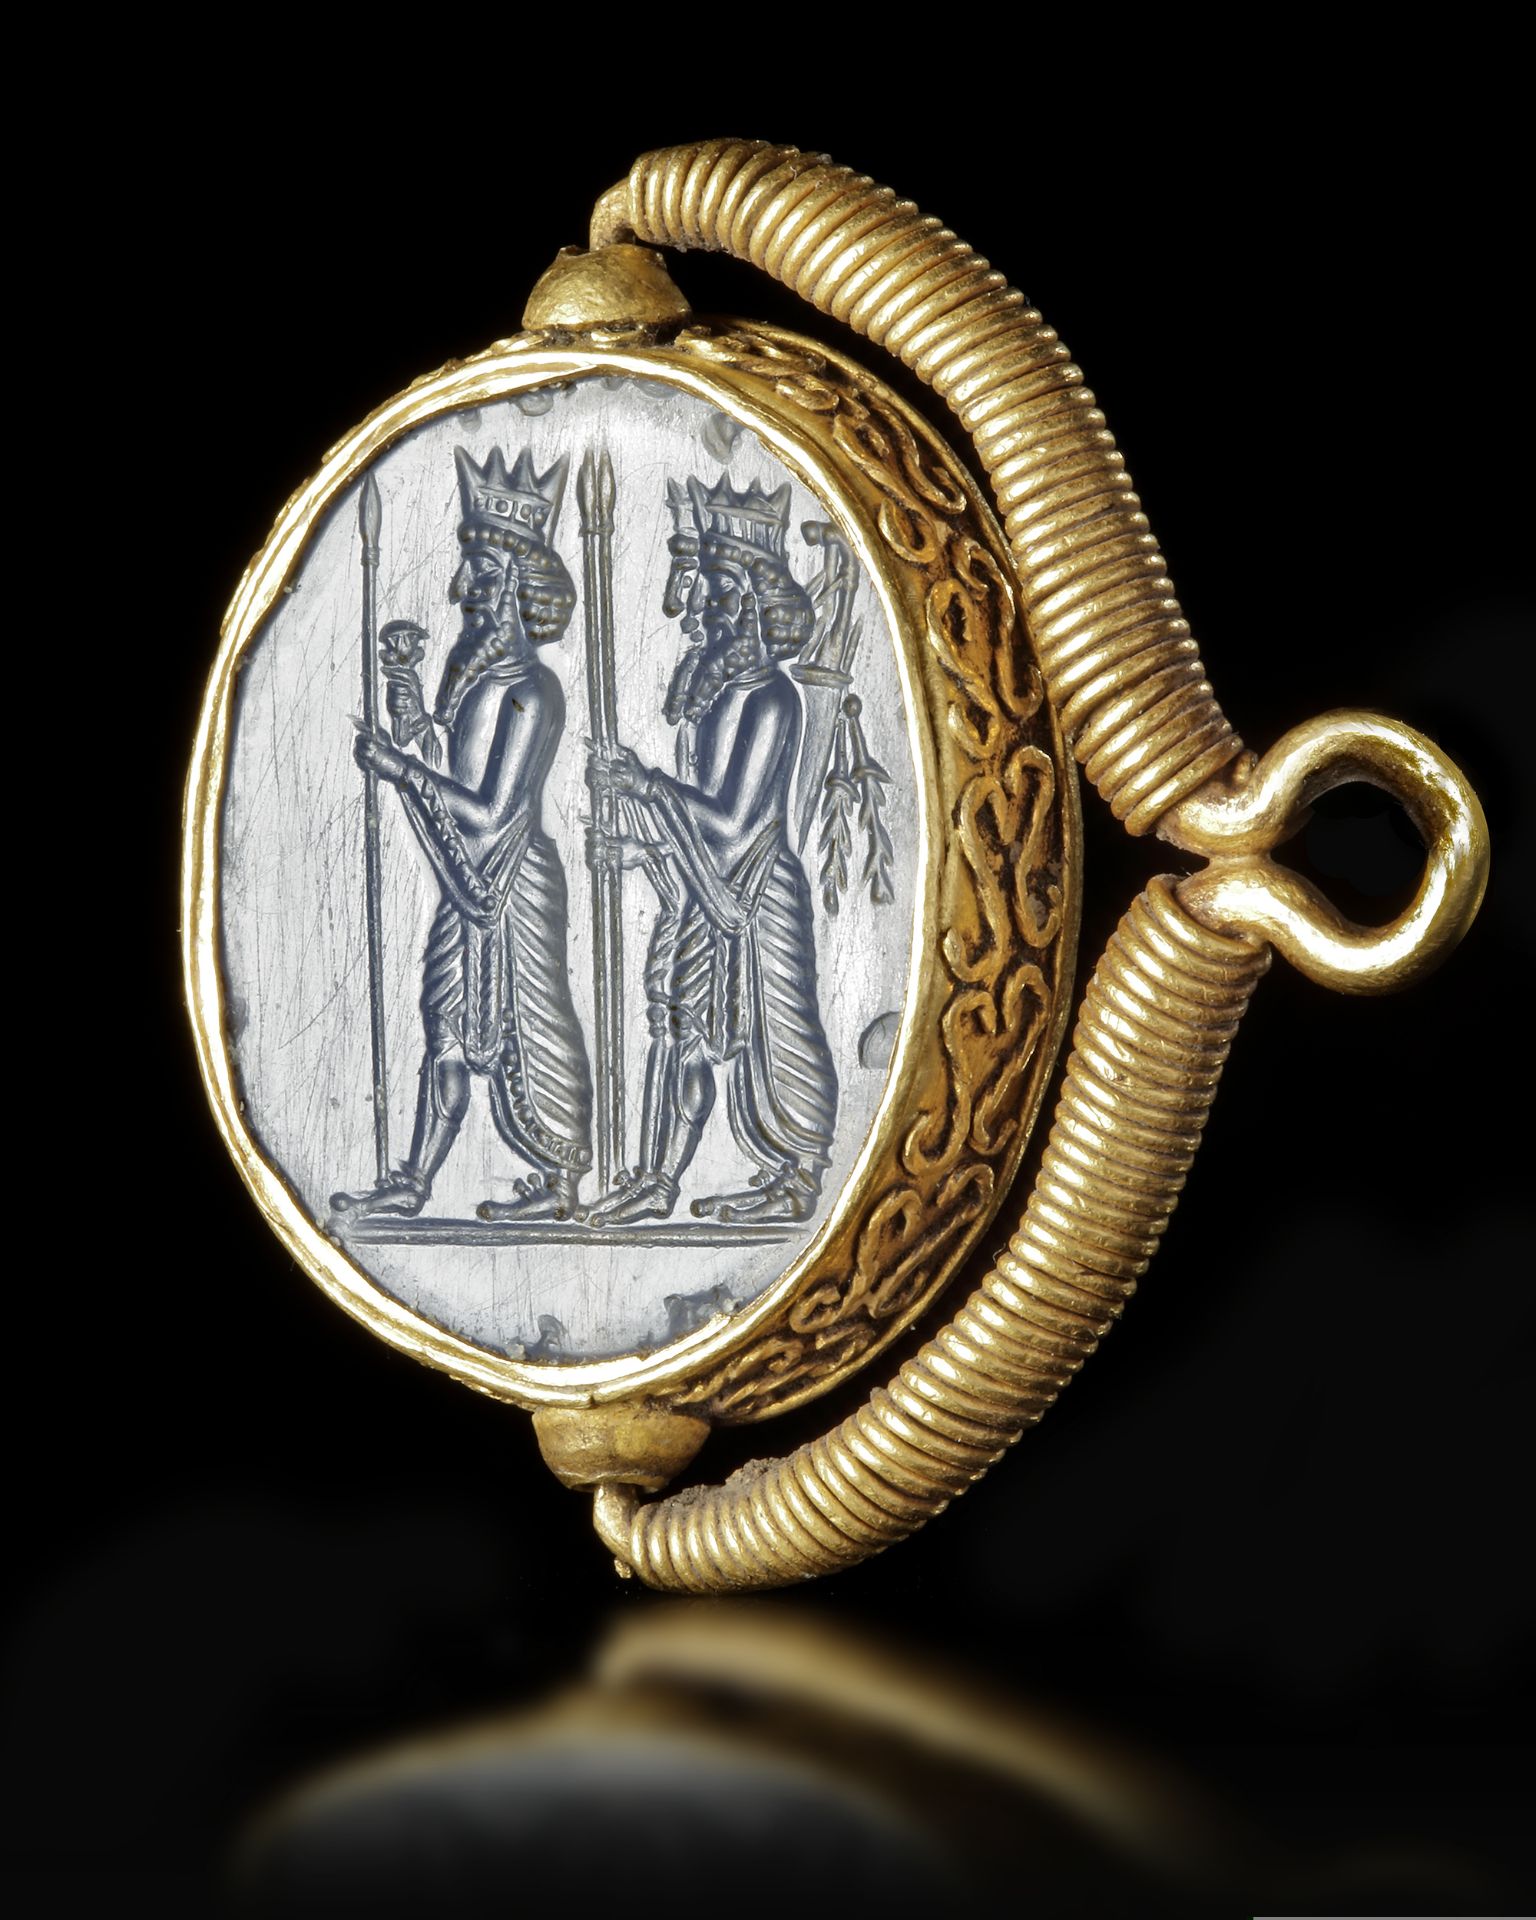 AN ACHAEMENID BLUE CHALCEDONY SEAL IN GOLD MOUNT, 5TH CENTURY BC